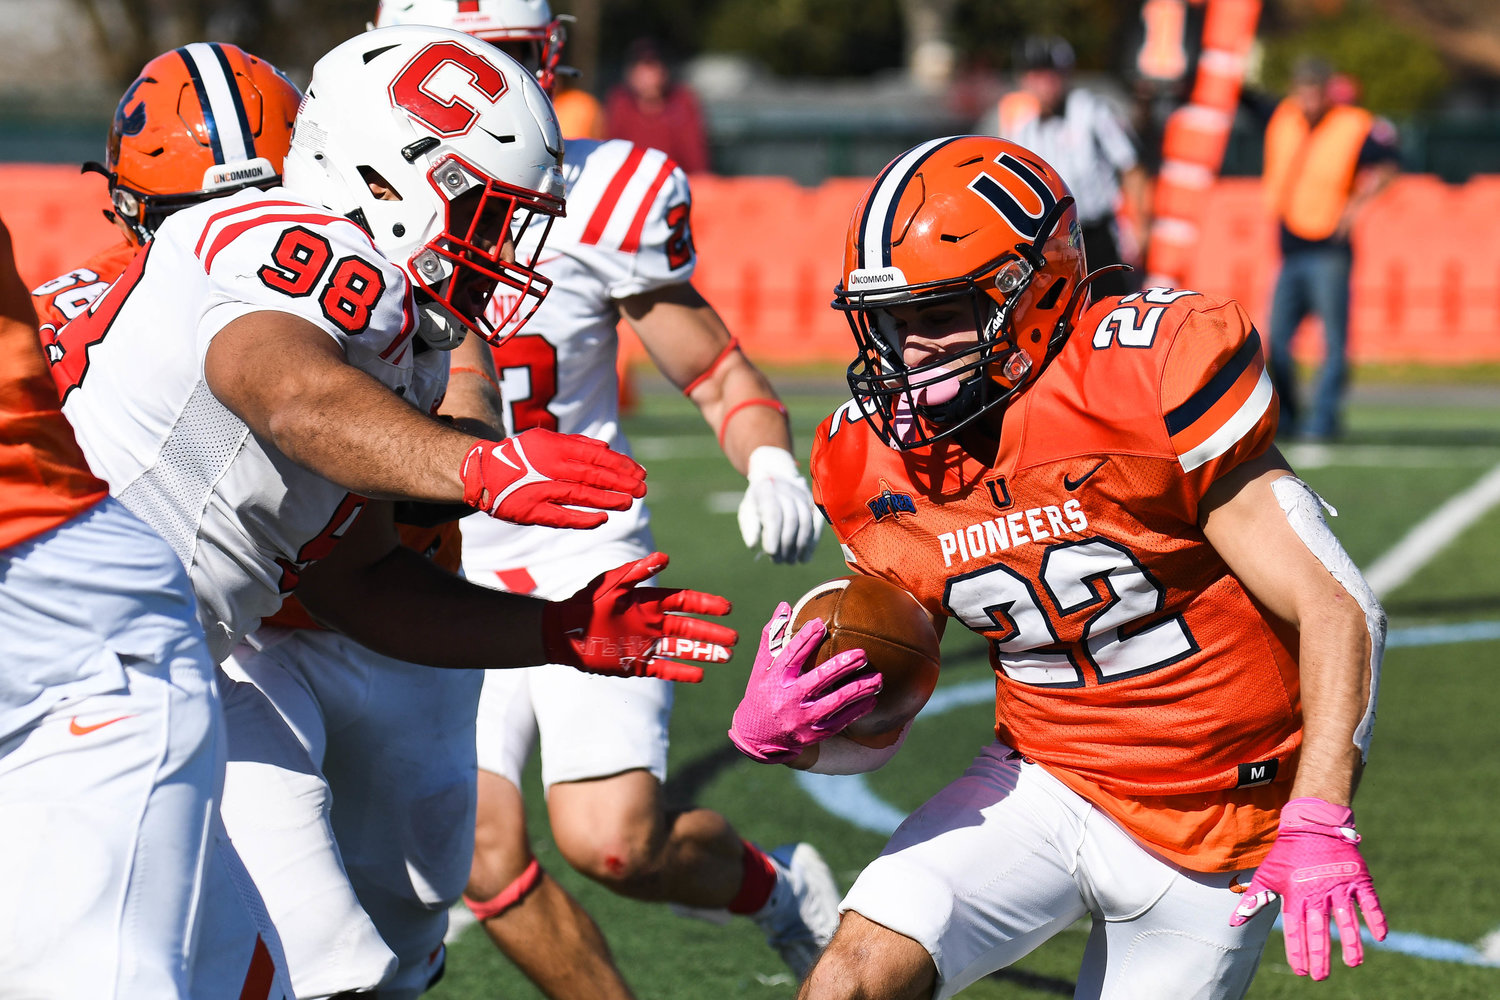 Utica University wide receiver Nate Palmer (22) avoids a tackle from SUNY Cortland defender Matt Ferrer (98) during the Empire 8 game on Saturday afternoon at Charles A. Gaetano Stadium in Utica. The Pioneers lost 48-21.